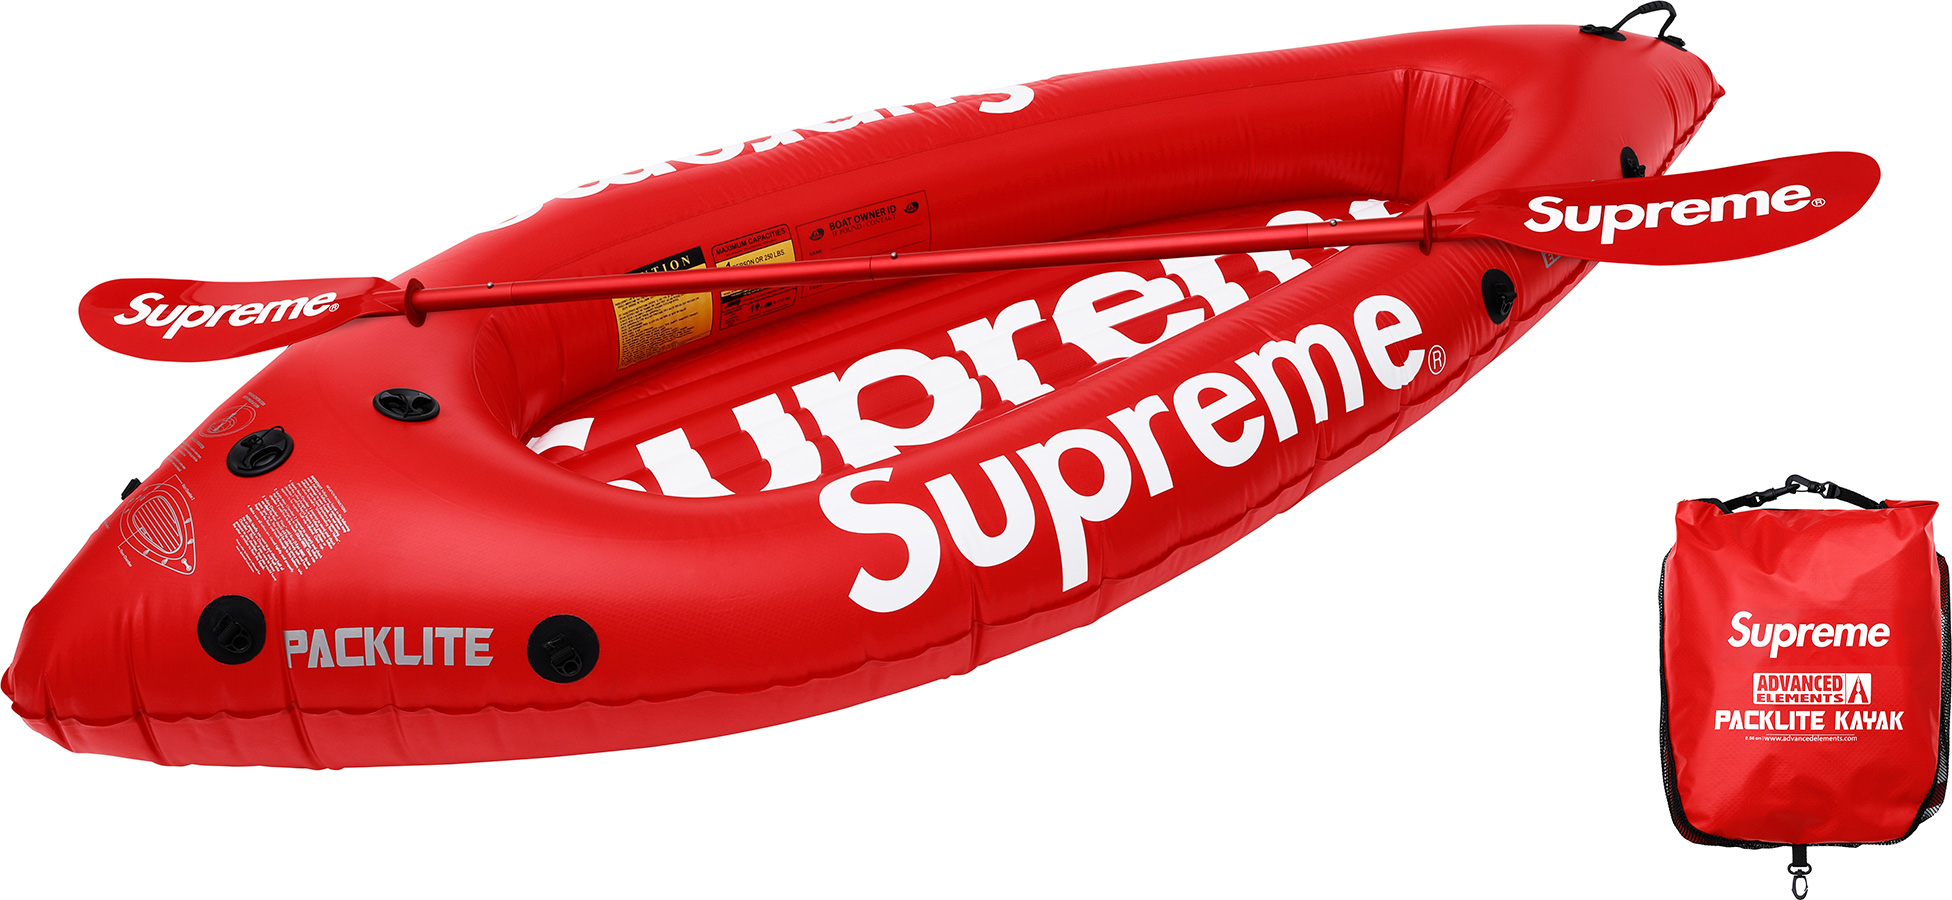 15 Of The Best, Most Random Supreme Collaborations